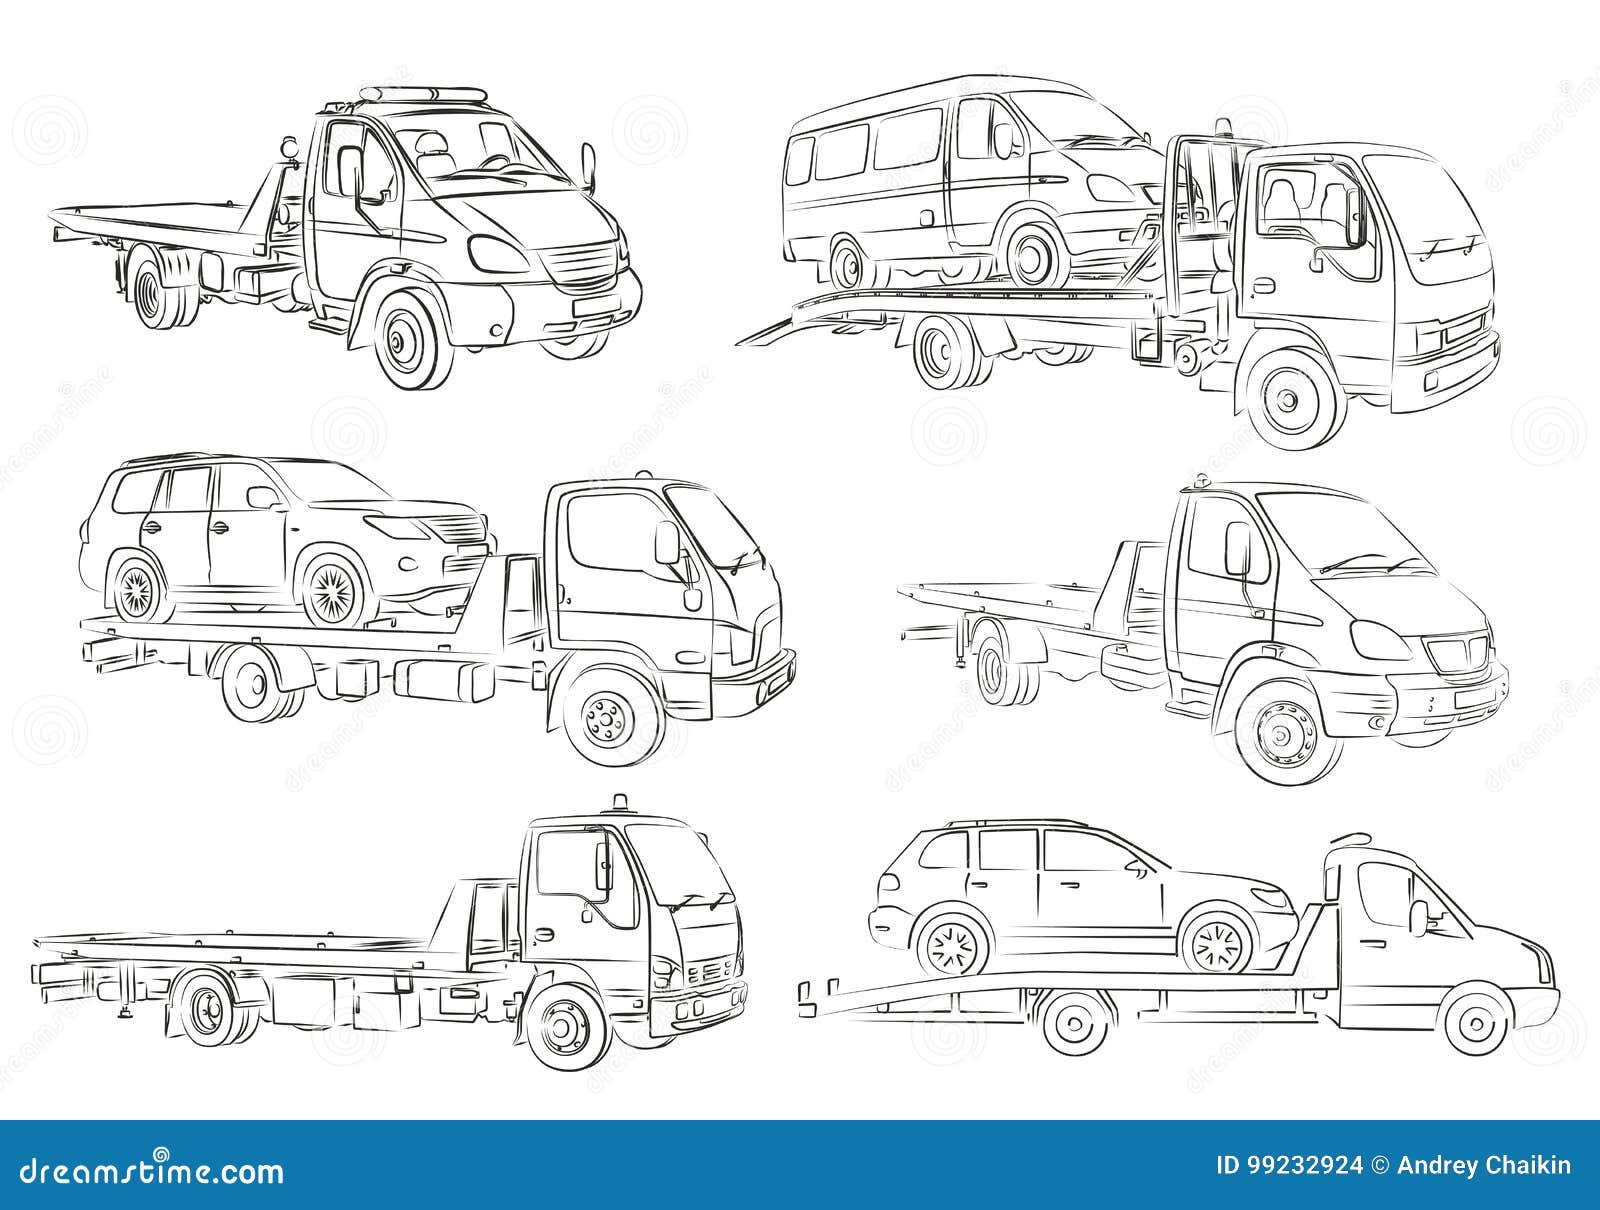 Sketches of tow trucks. stock vector. Illustration of sketch - 99232924